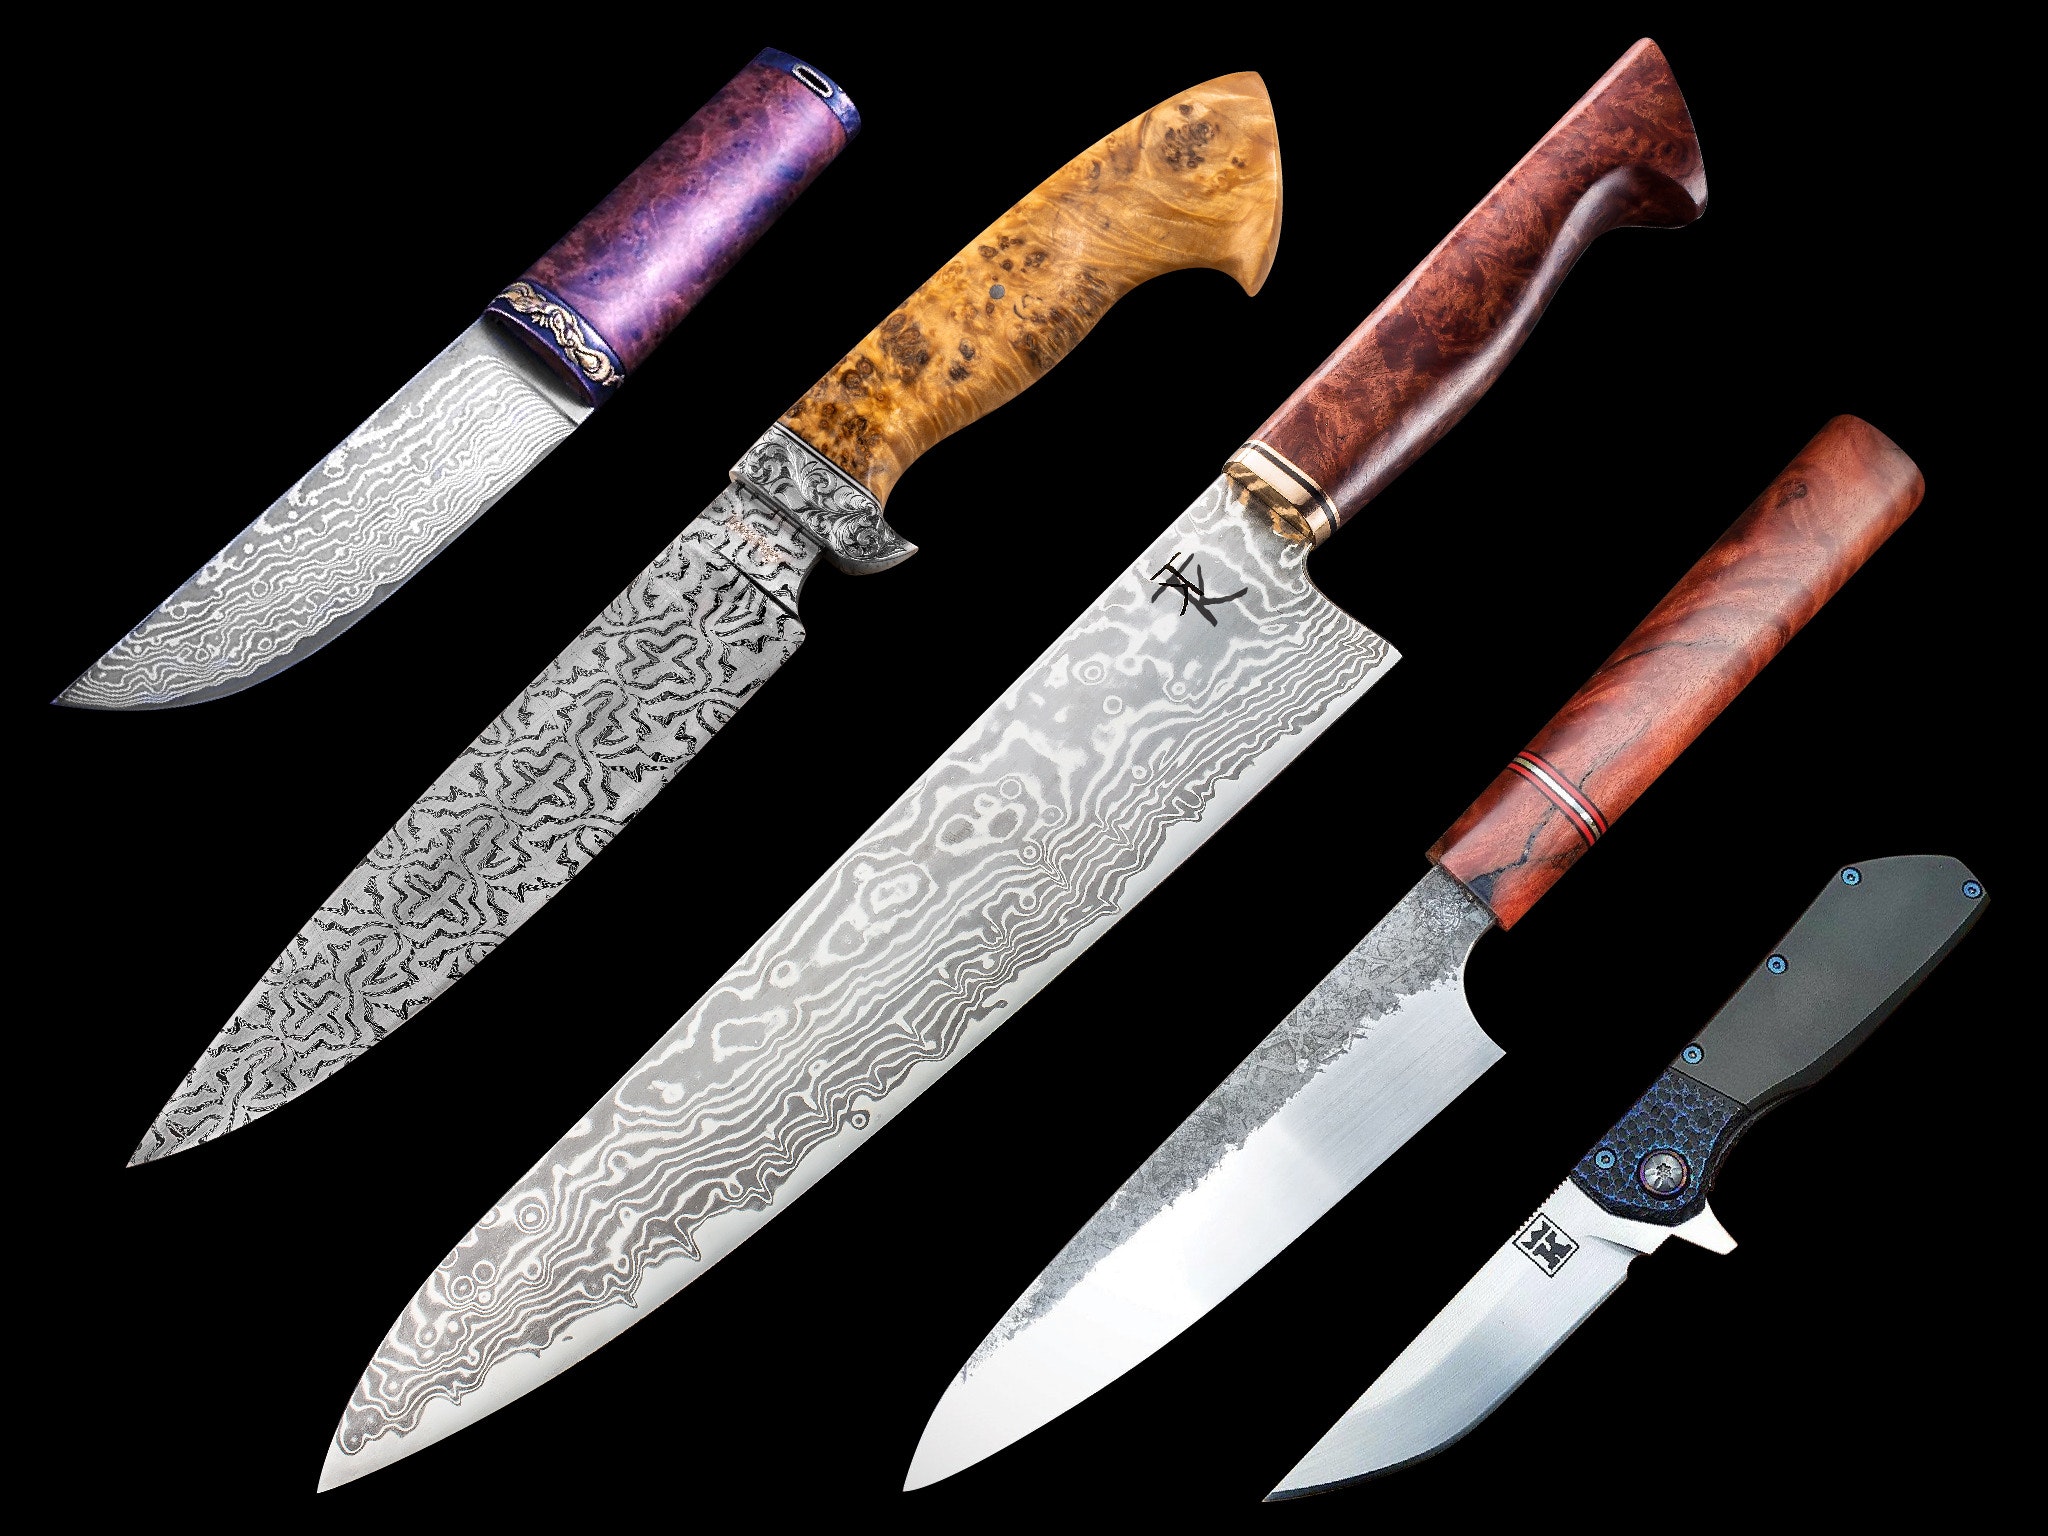 Vairous knives from Queensland Knife Show exhibitors